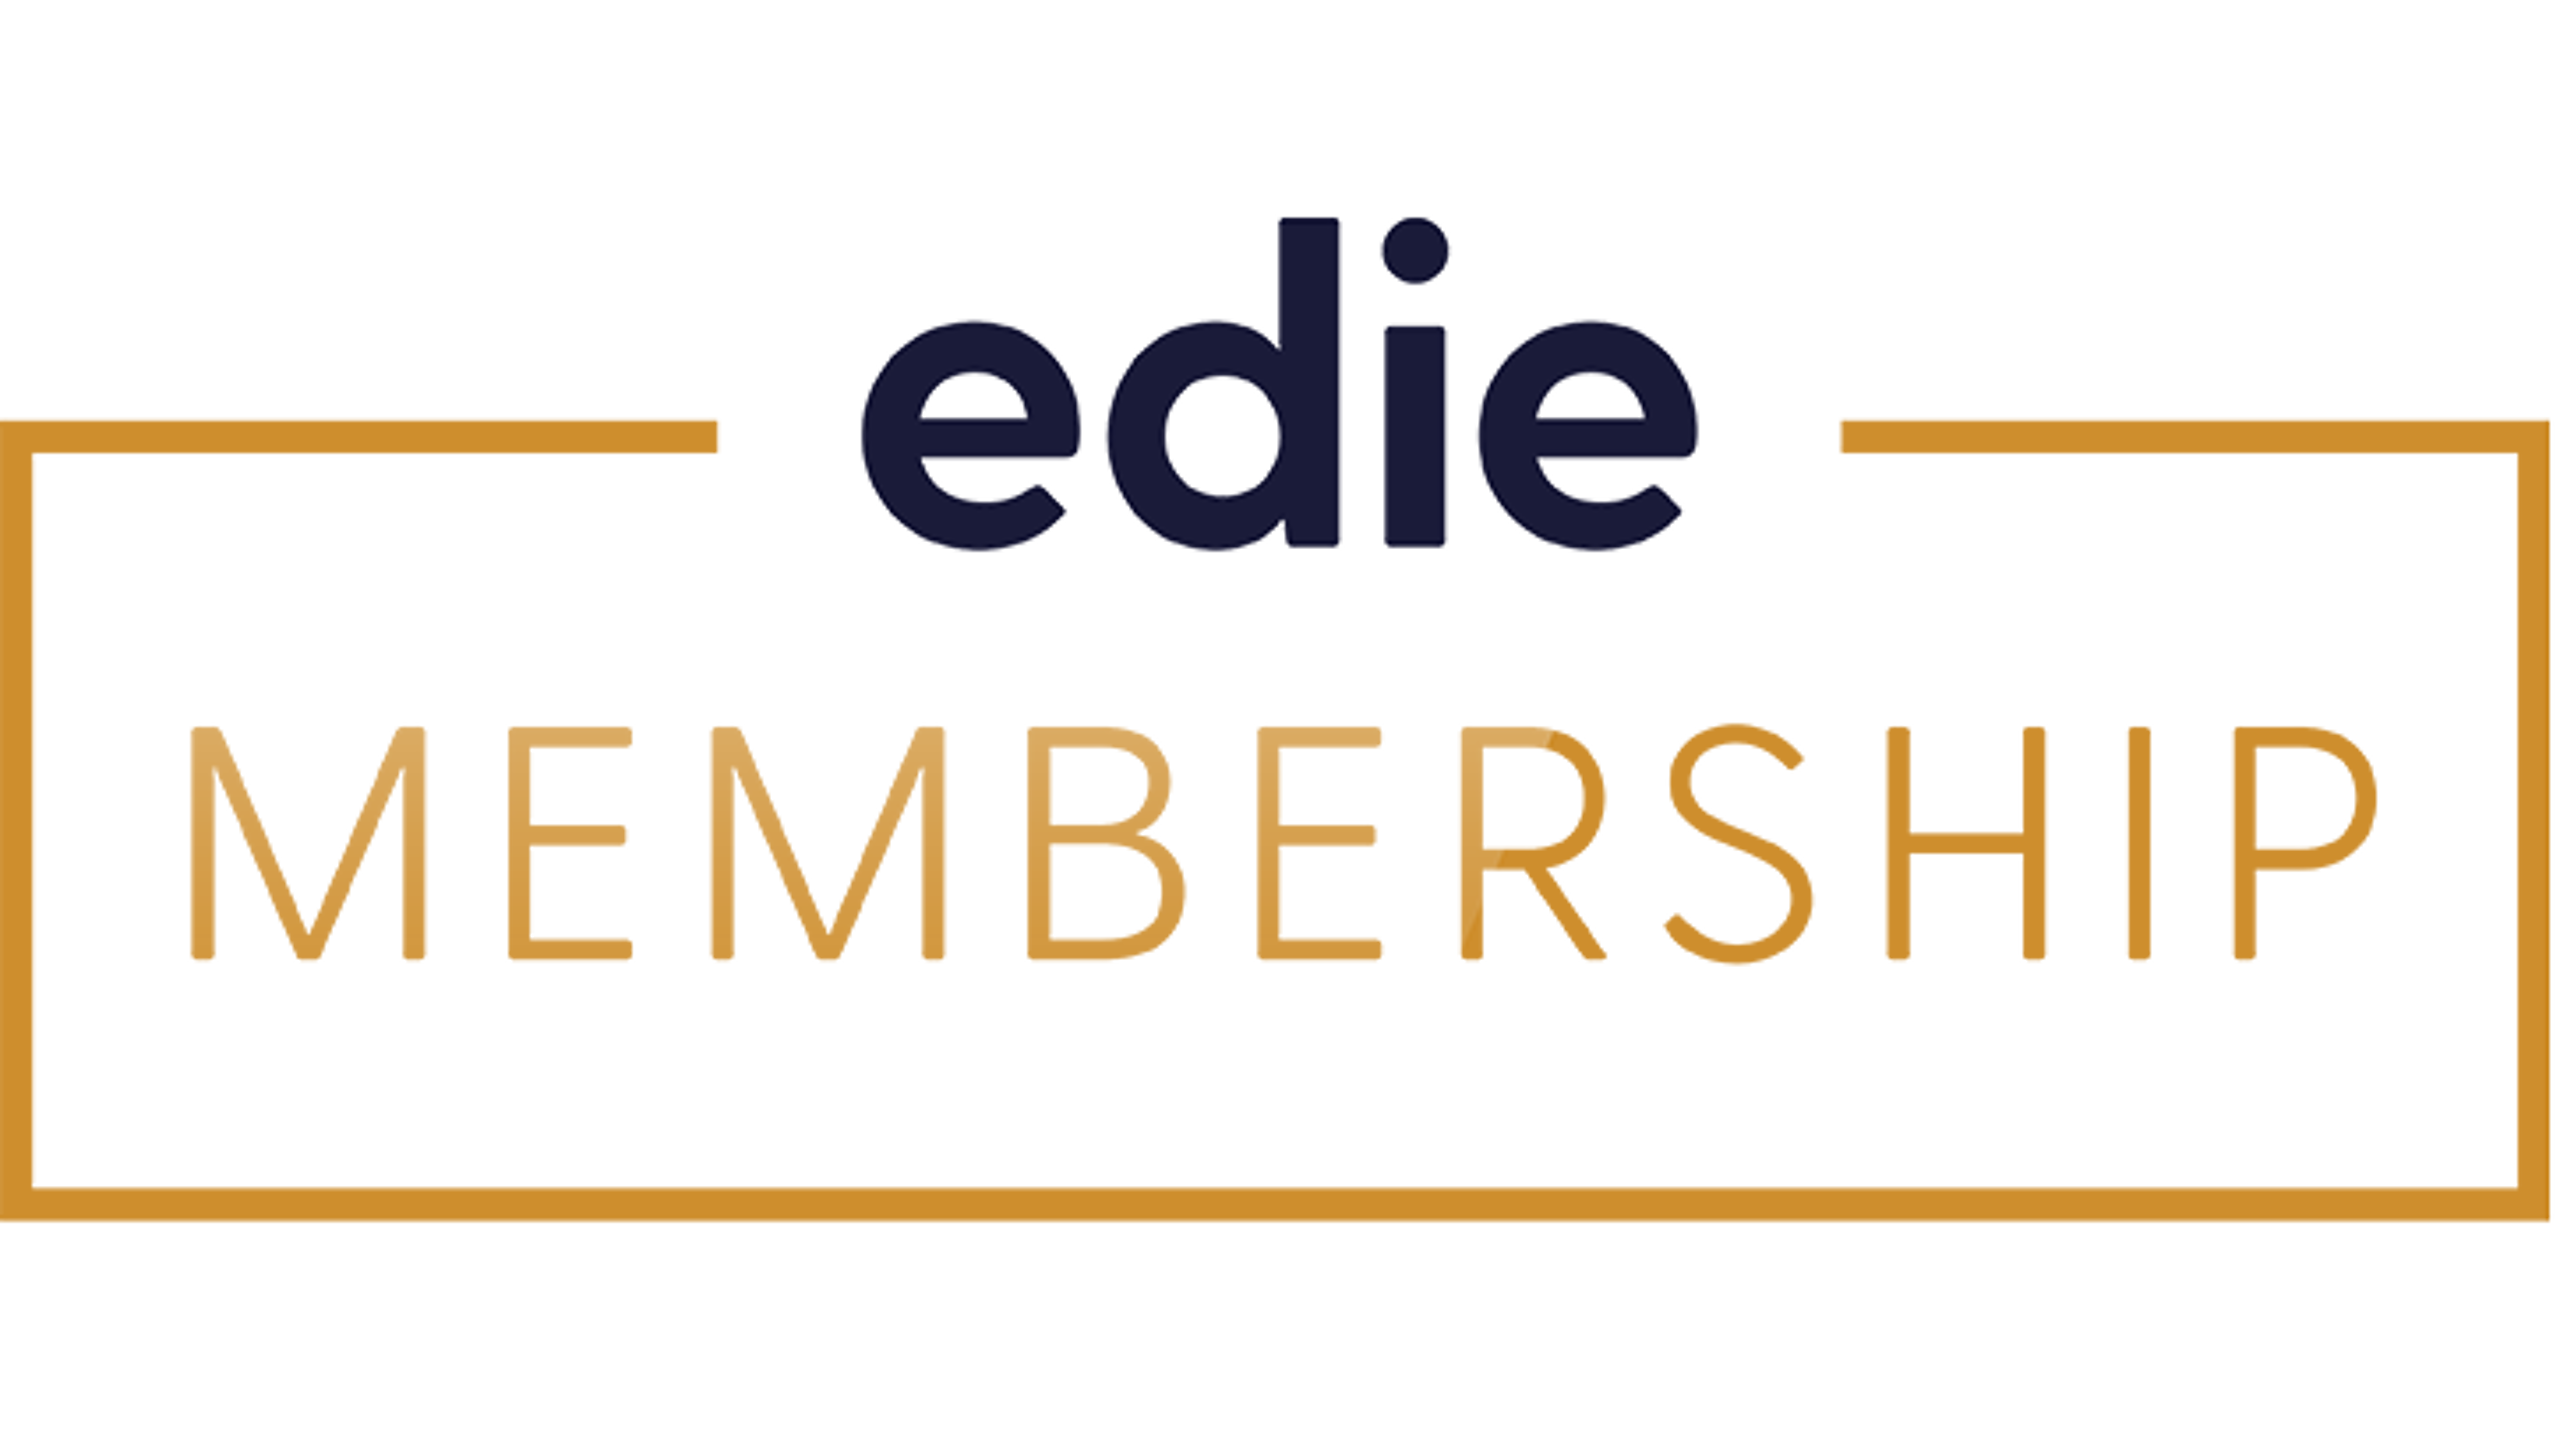 Inform, collaborate, lead: edie launches new network for sustainable business